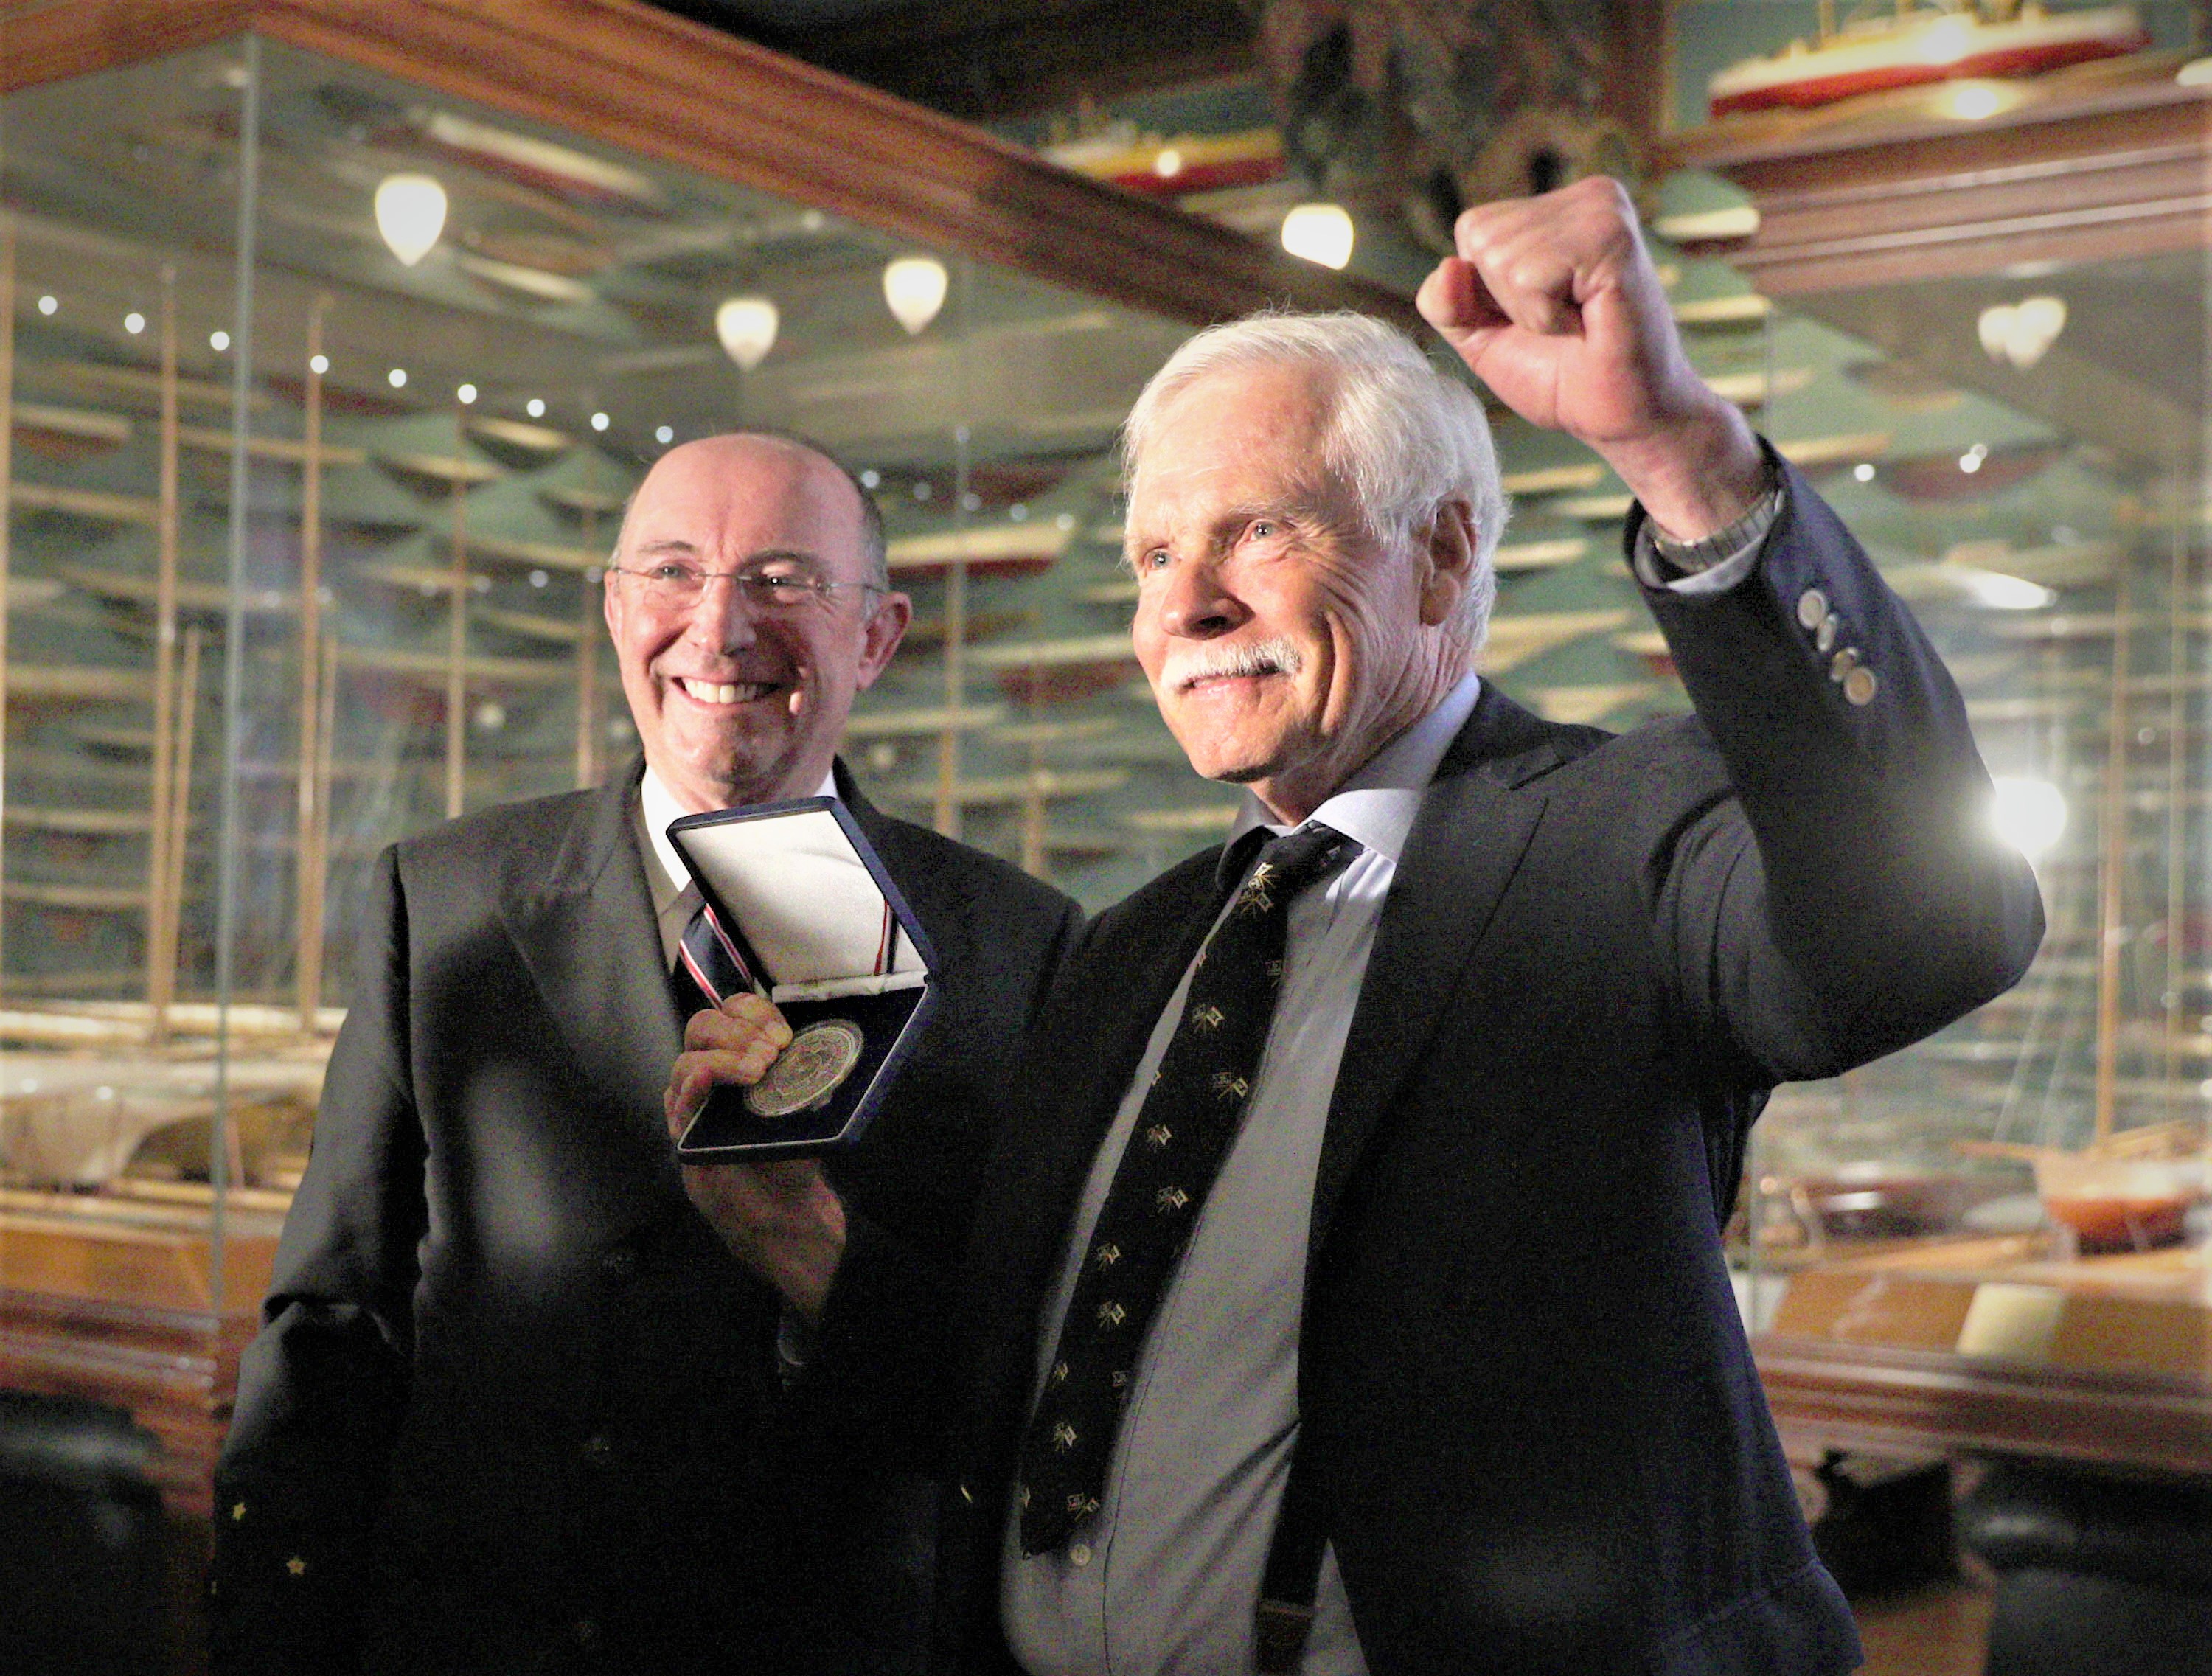 Ted Turner honored by New York Yacht Club